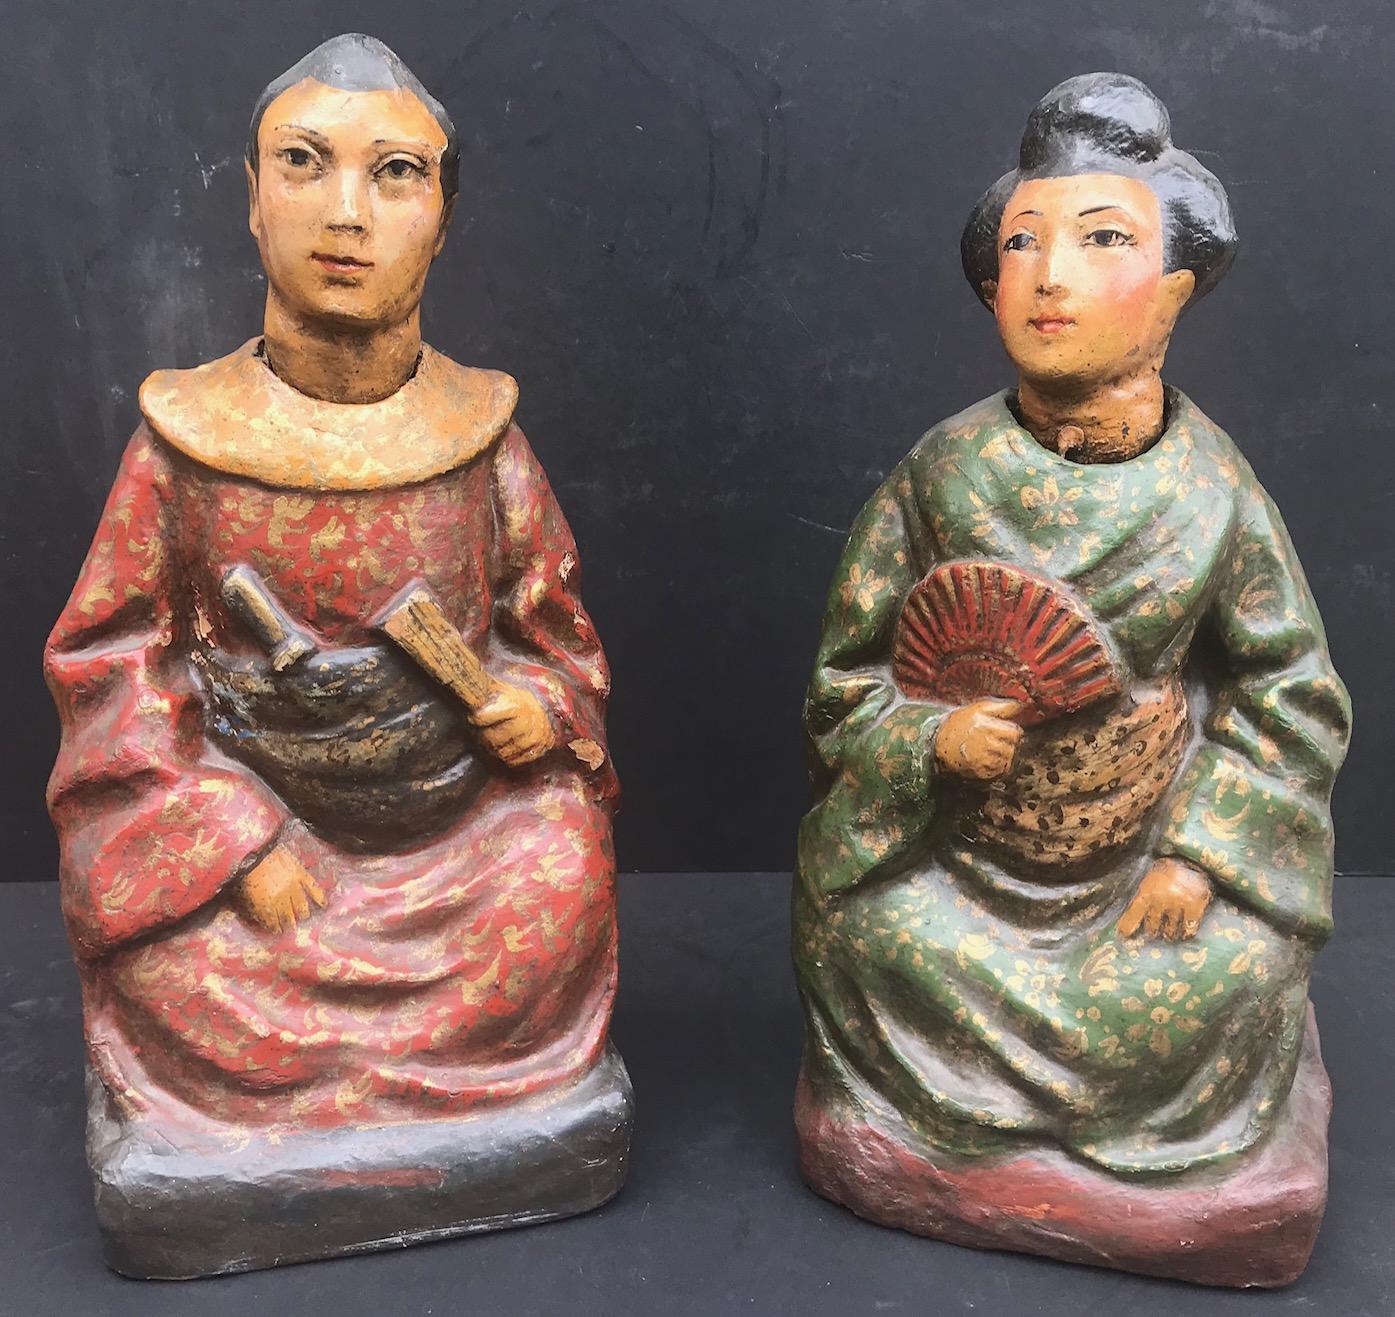 These two figures, male and female, are made for the British market. They wear traditional Chinese robes with elaborate original polychrome decoration. Both heads nod in different directions. The vast majority of nodding head figures was imported